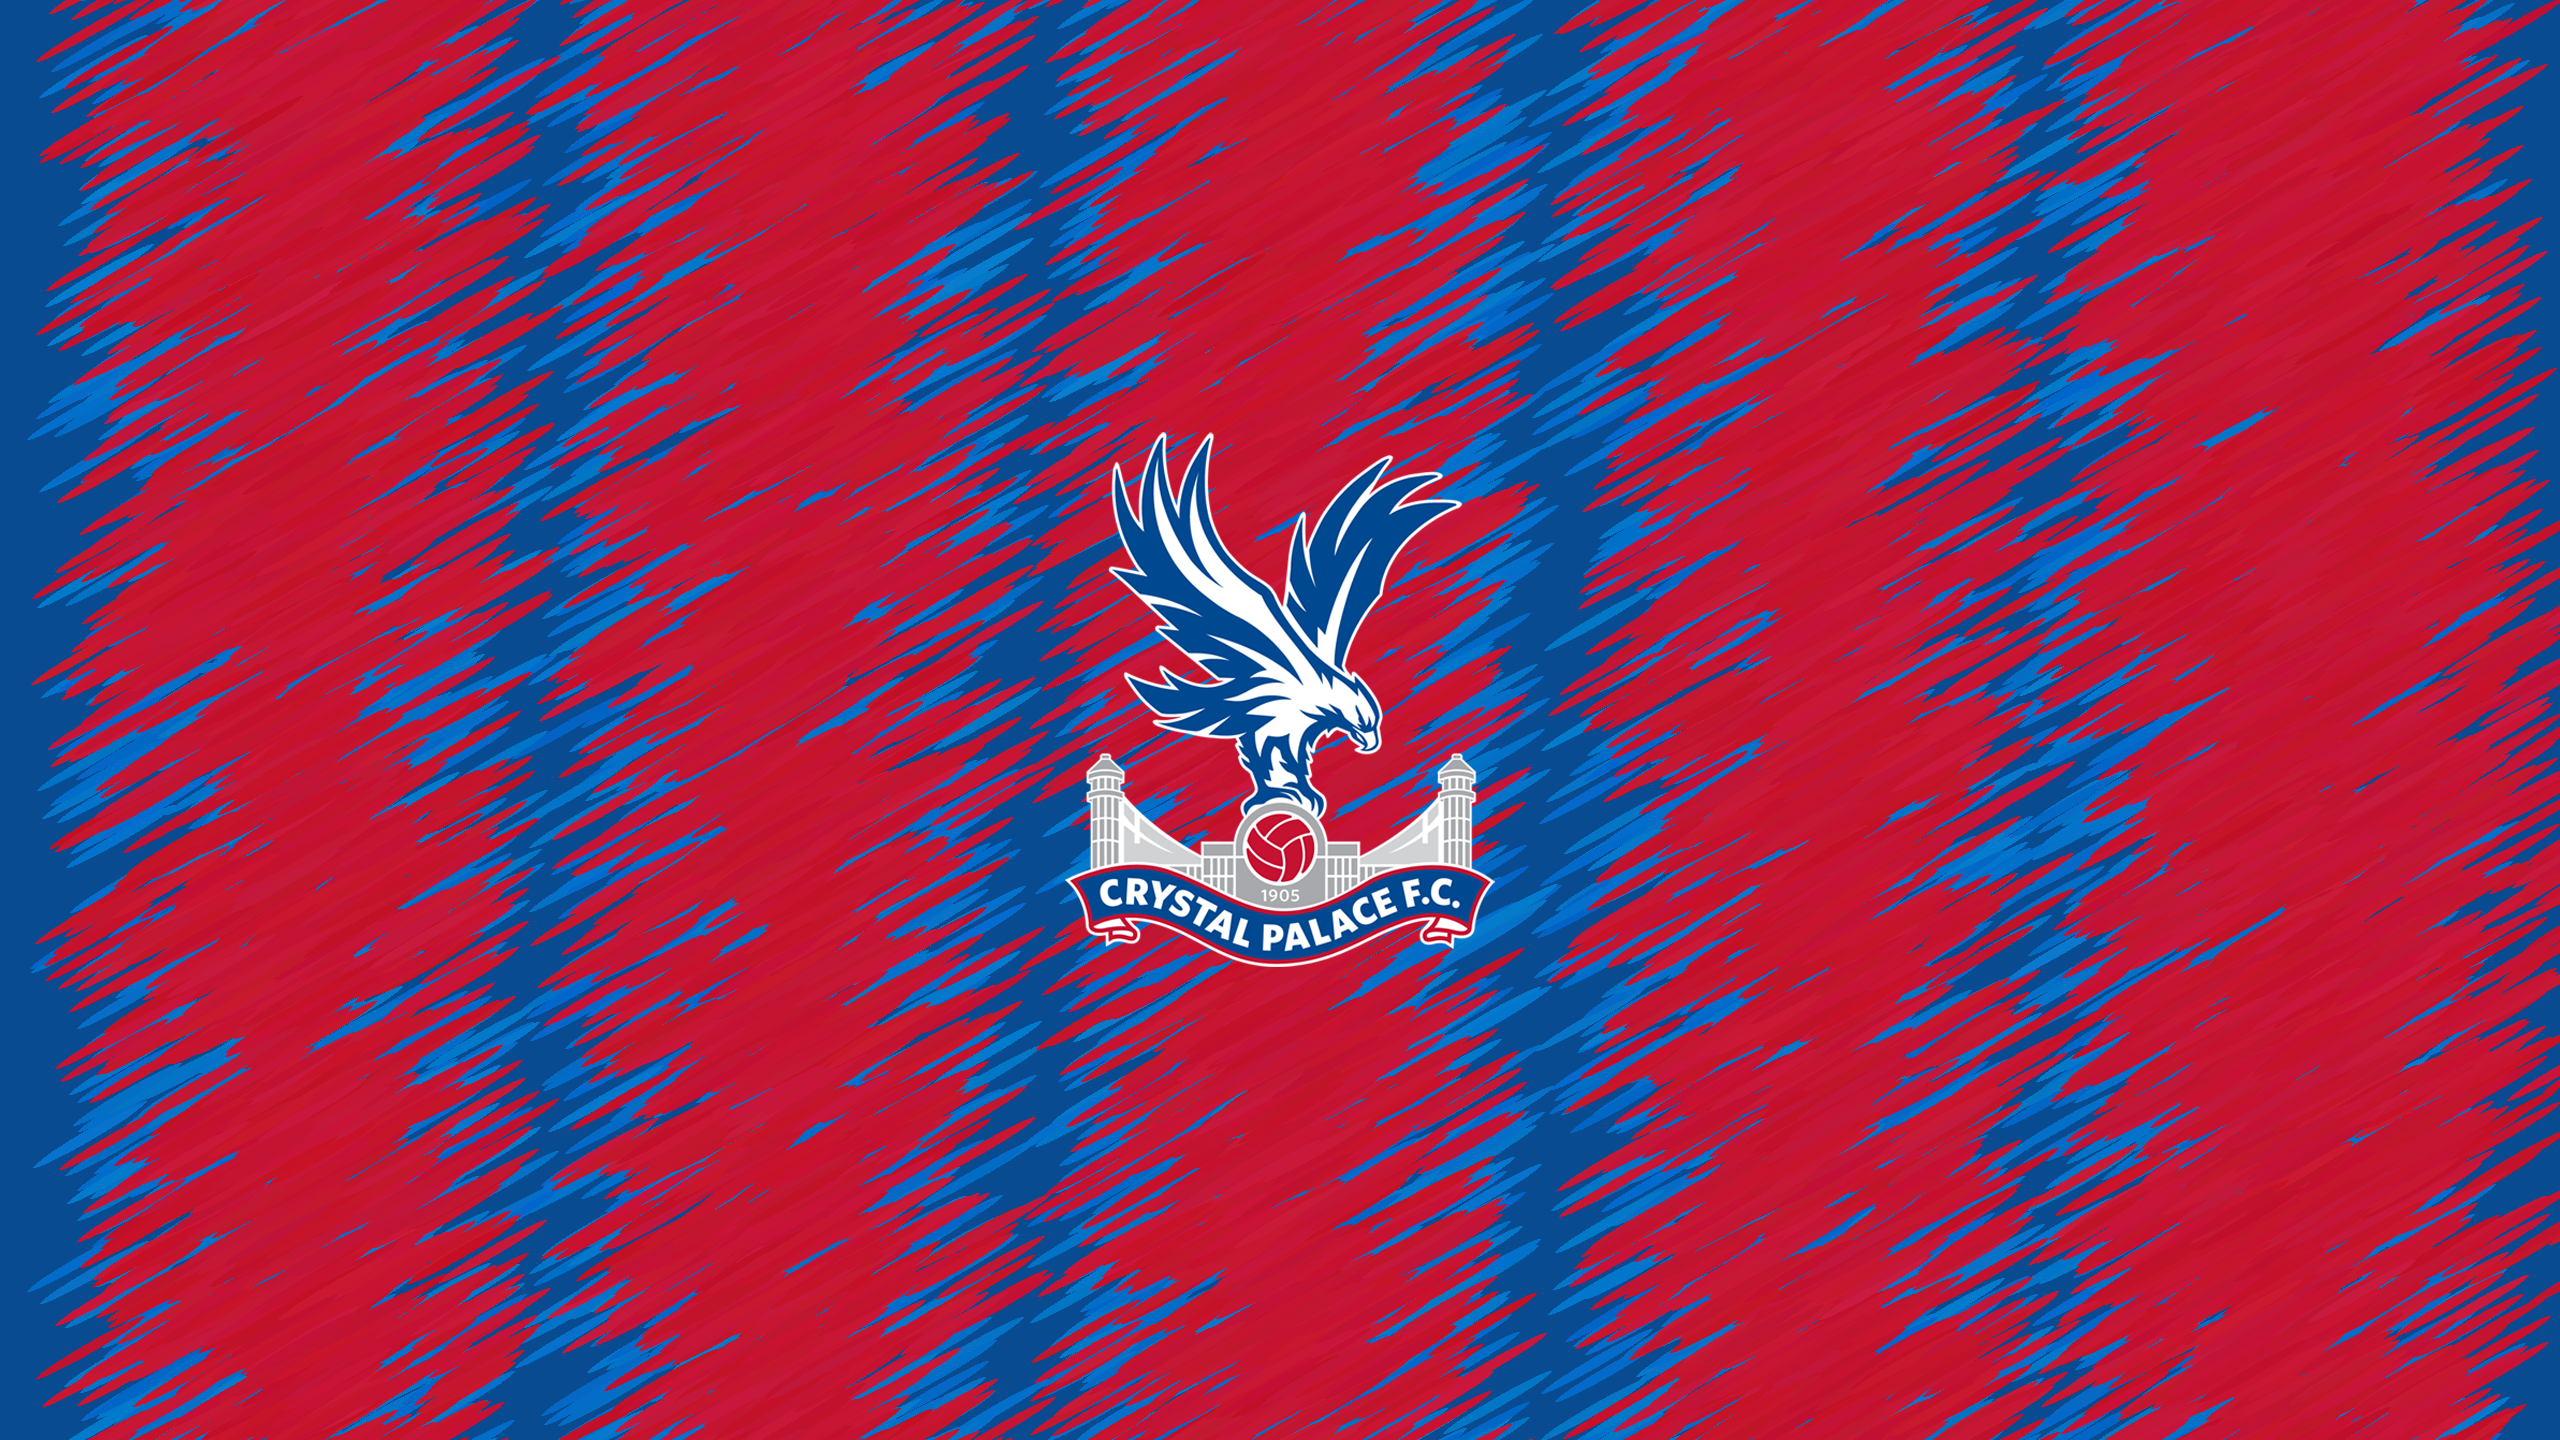 Crystal Palace F.C. - English Premier League - Soccer - Square Bettor